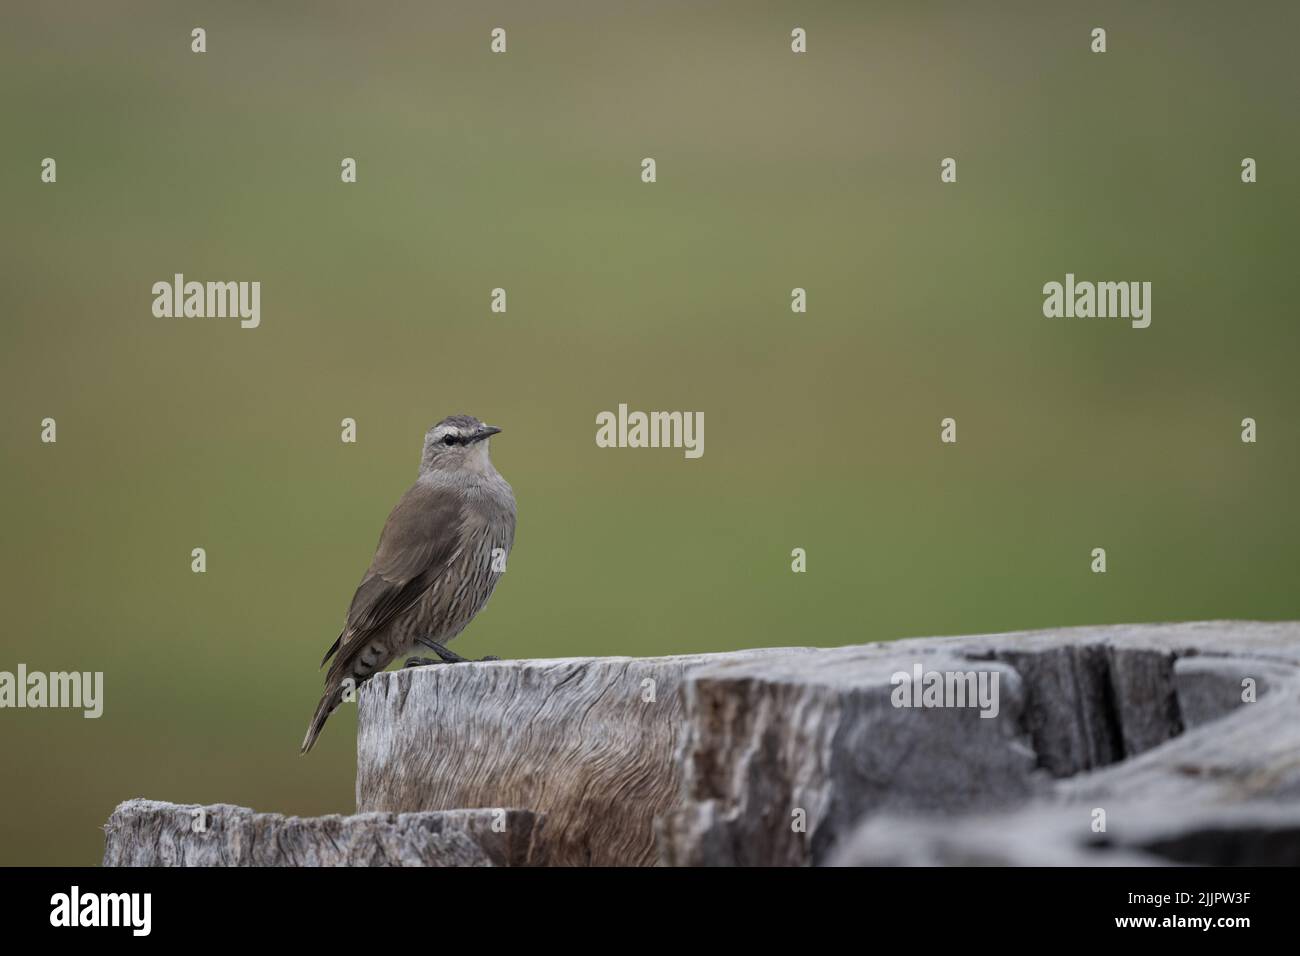 A White-browed Treecreeper on a stump surveying the area as it begins it's morning foraging at Lara Wetlands in Outback Queensland, Australia. Stock Photo